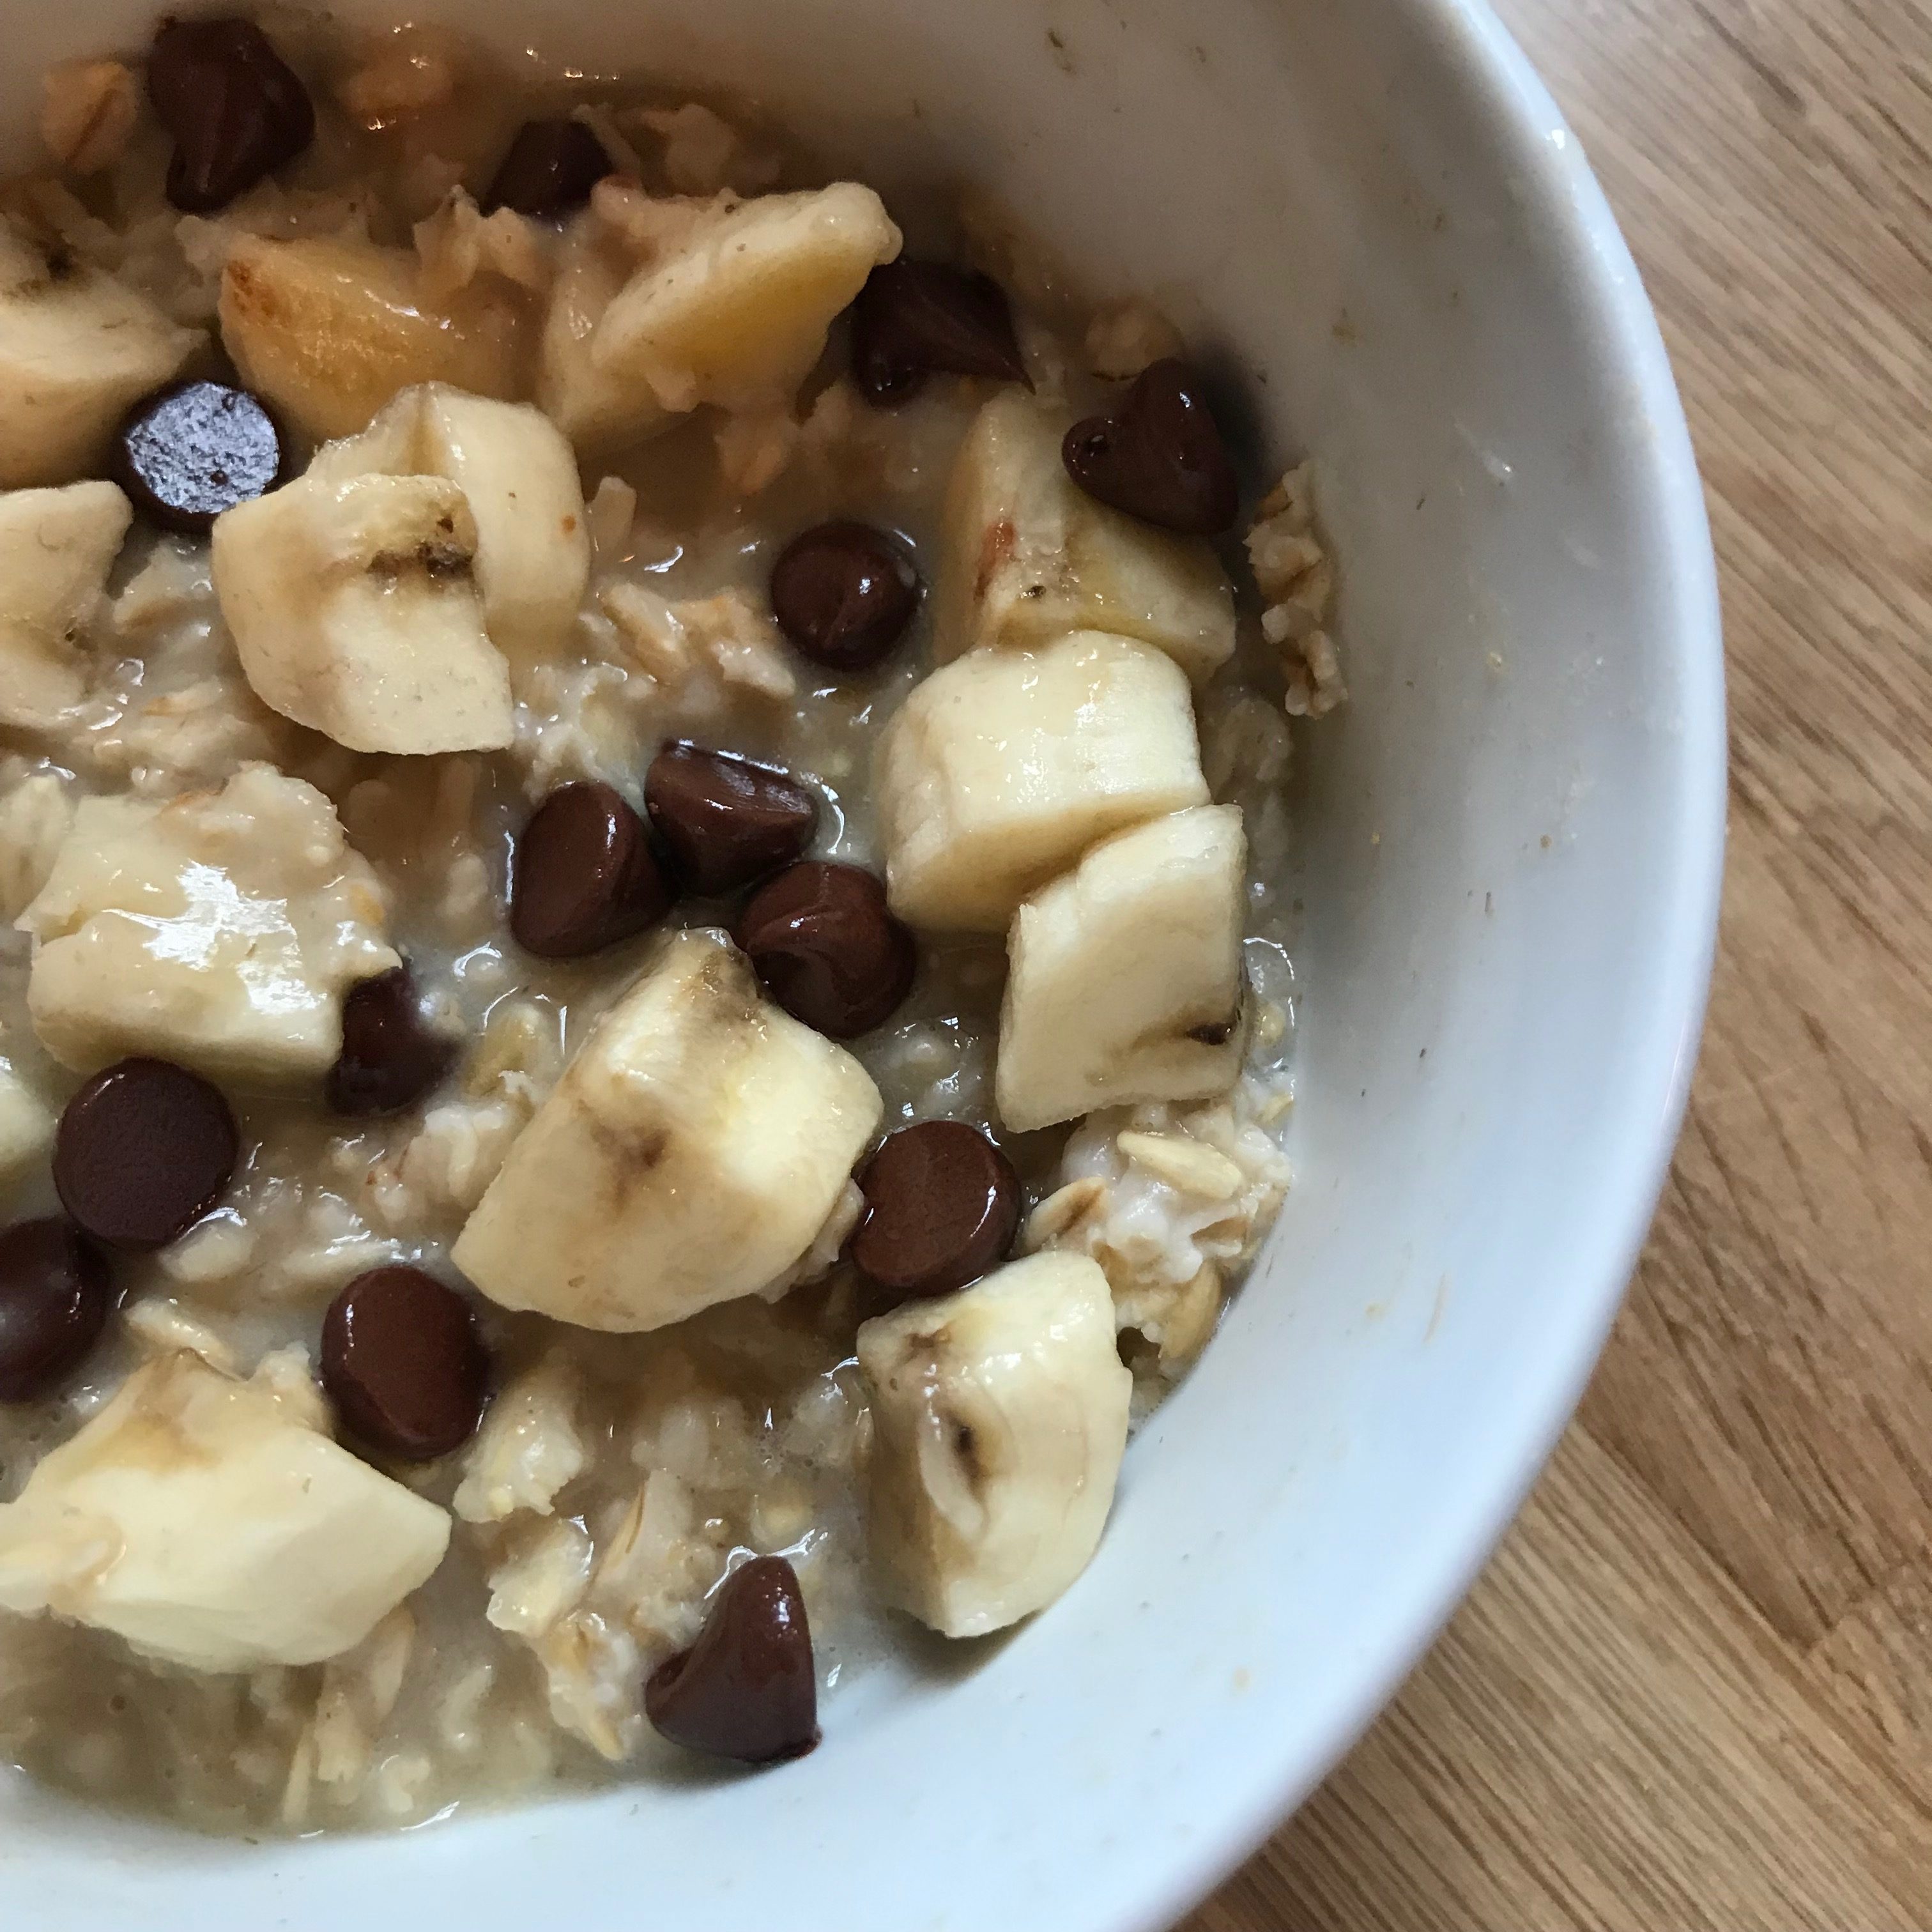 Healthy Breakfast: Peanut Butter, Chocolate Chip Oatmeal Bowls